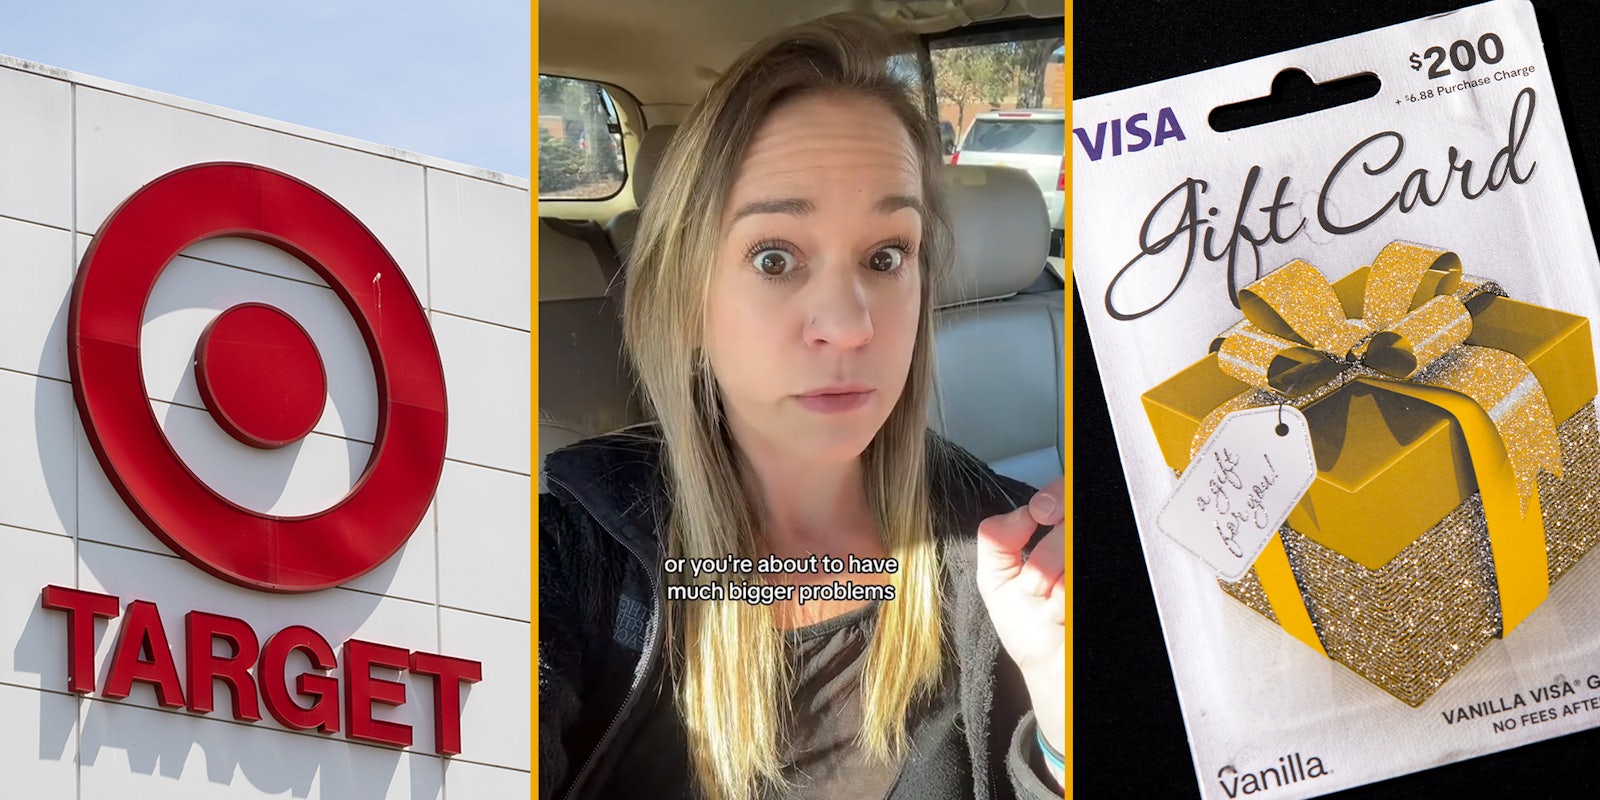 50 Visa gift cards purchased at Target were empty. Target says call Visa. Visa says call Target.